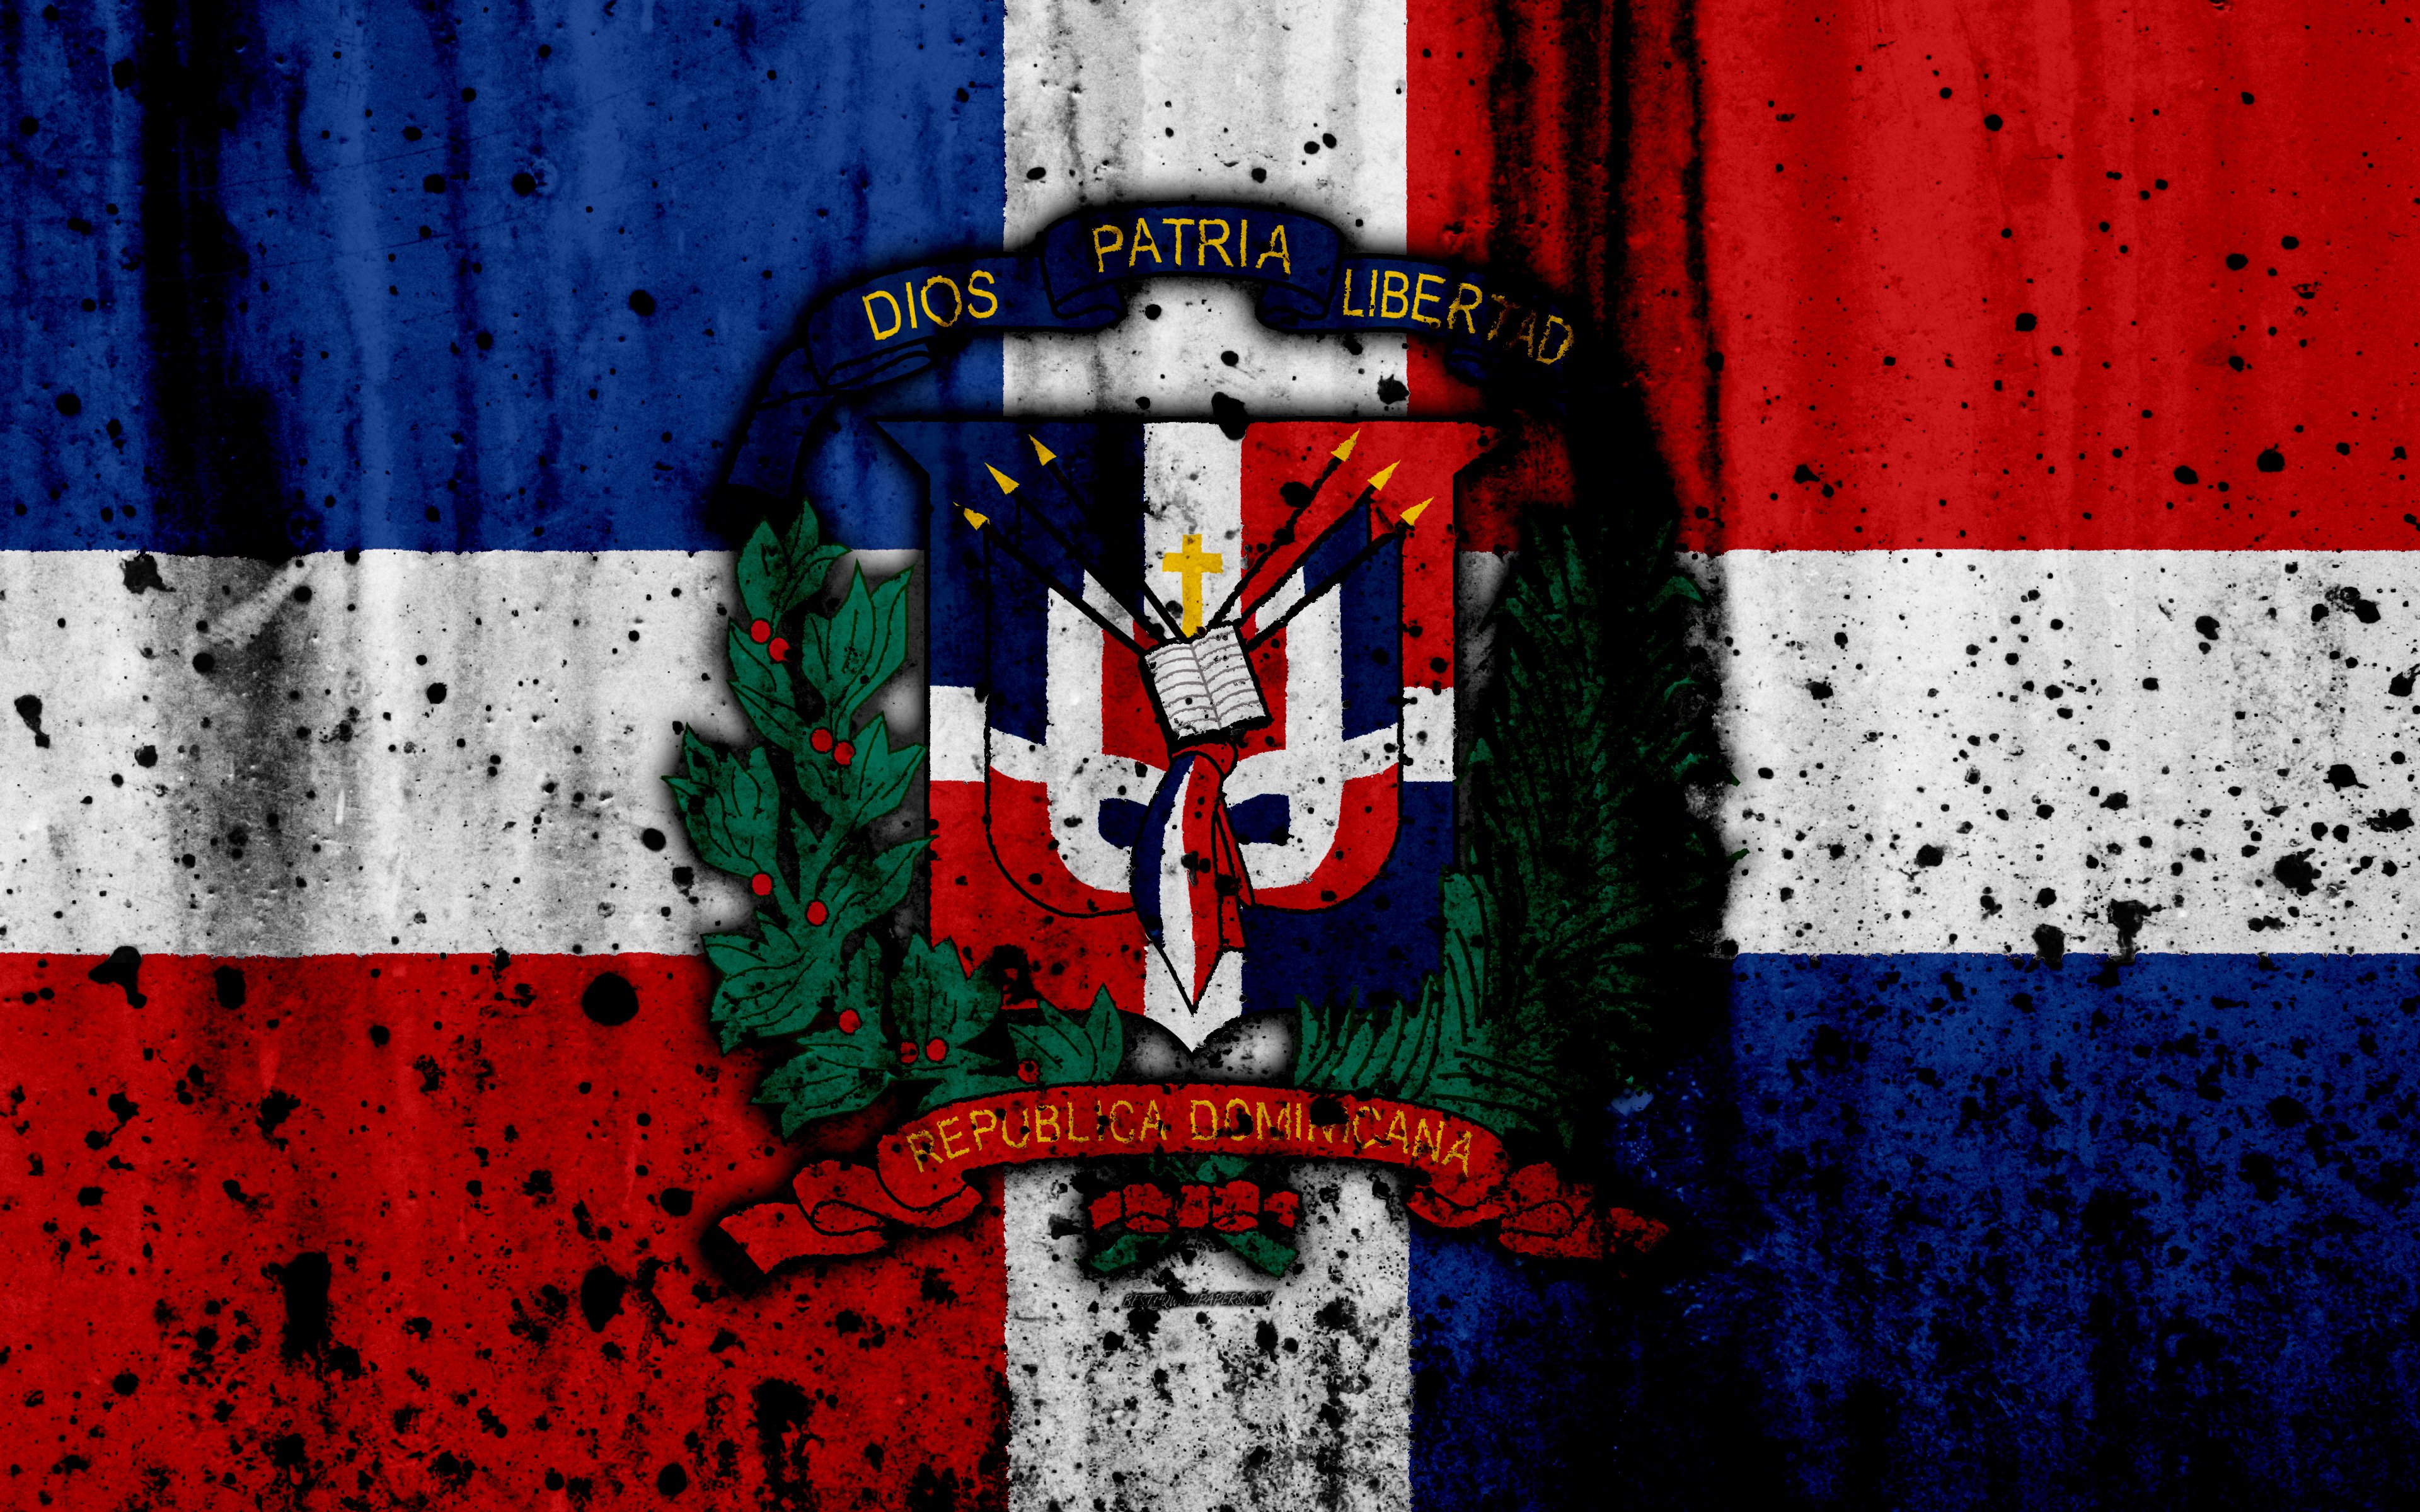 Download wallpaper Dominican Republic flag, 4k, grunge, North America, national symbols, Dominican Republic, coat of arms Dominican Republic, national emblem for desktop with resolution 3840x2400. High Quality HD picture wallpaper